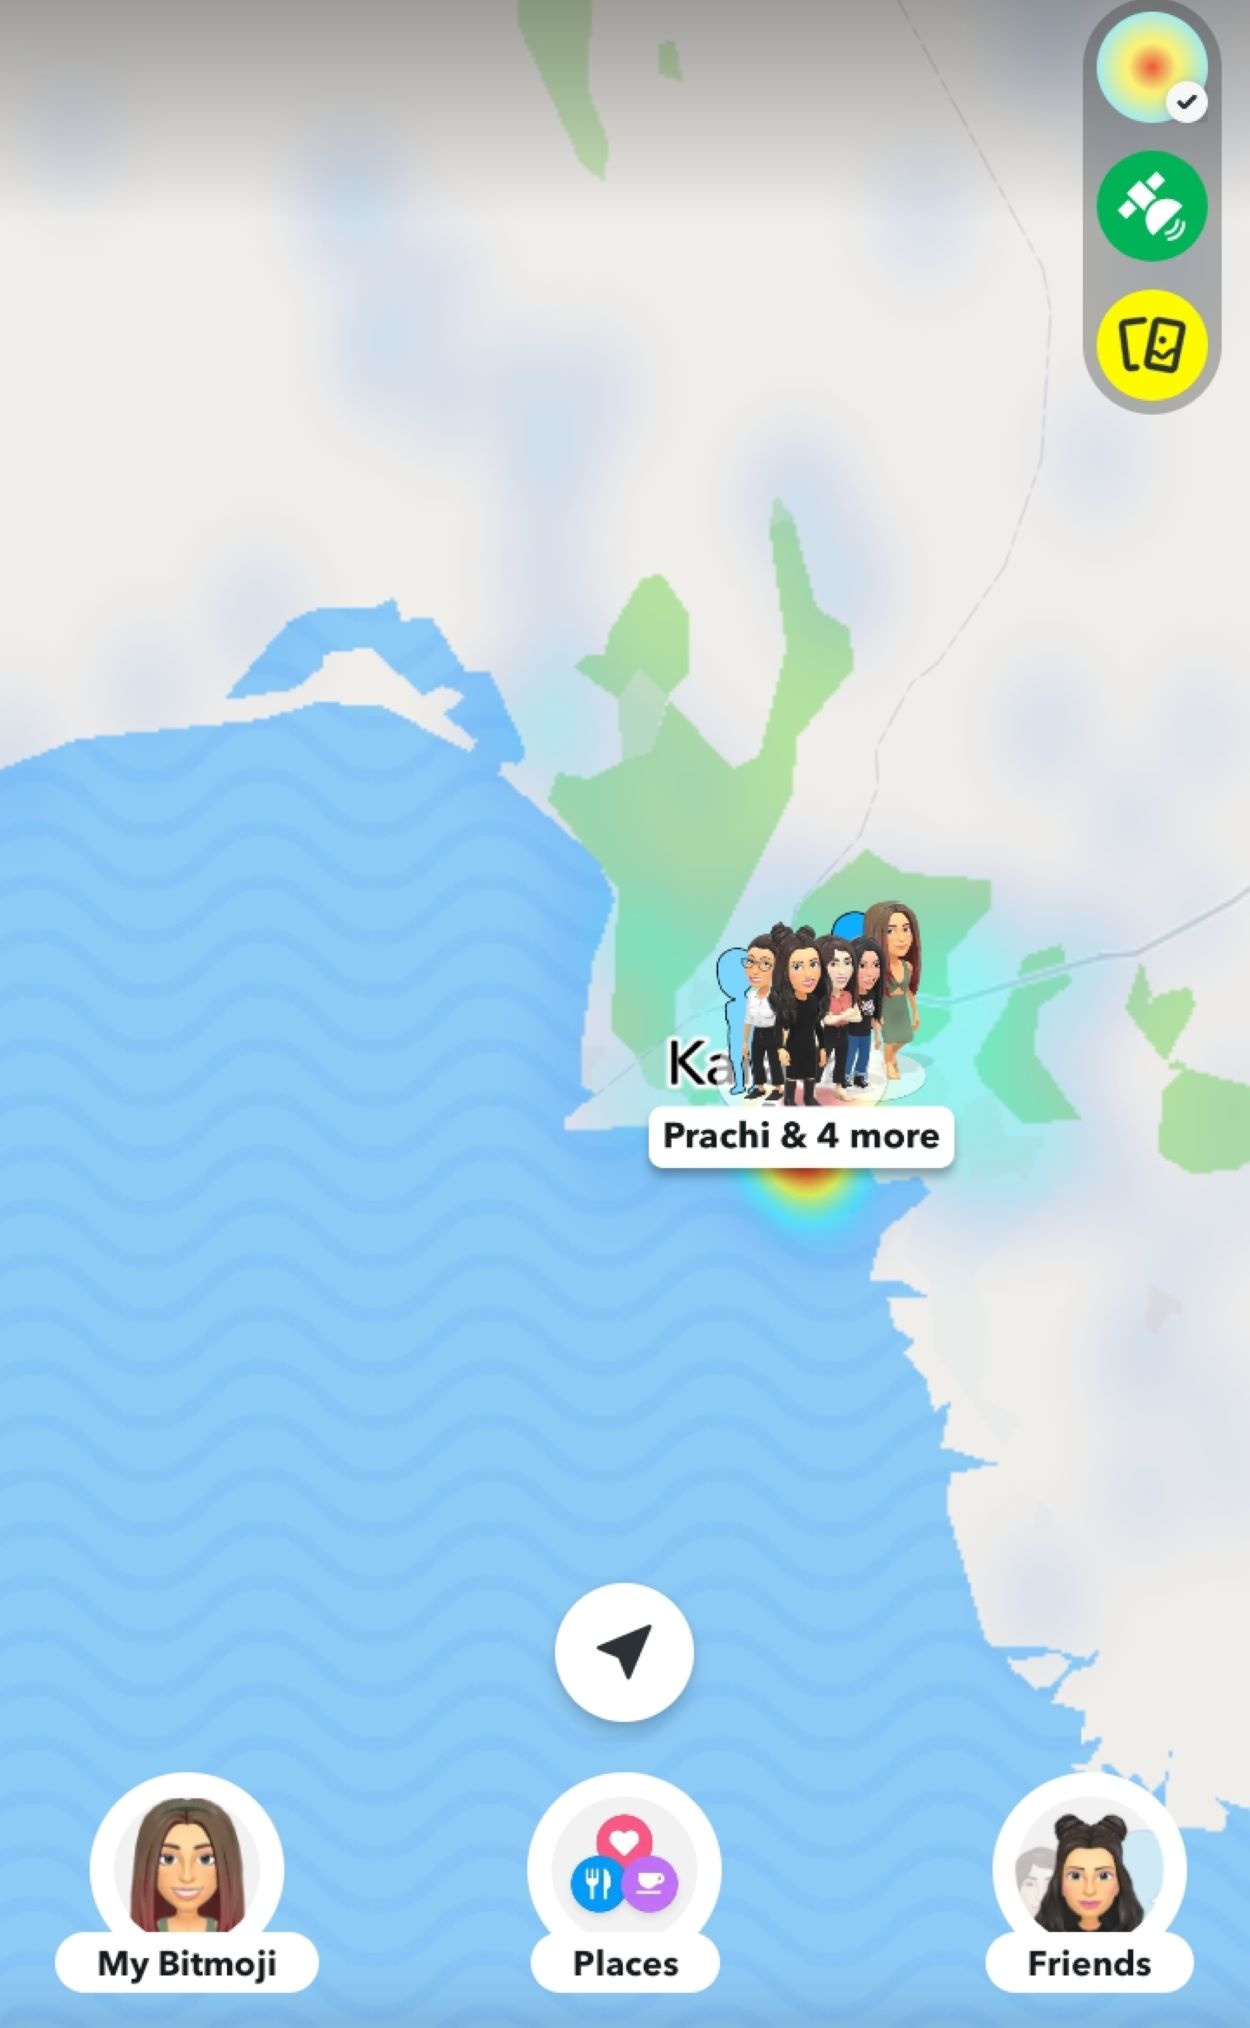 Snap Map showing the location of 5 people